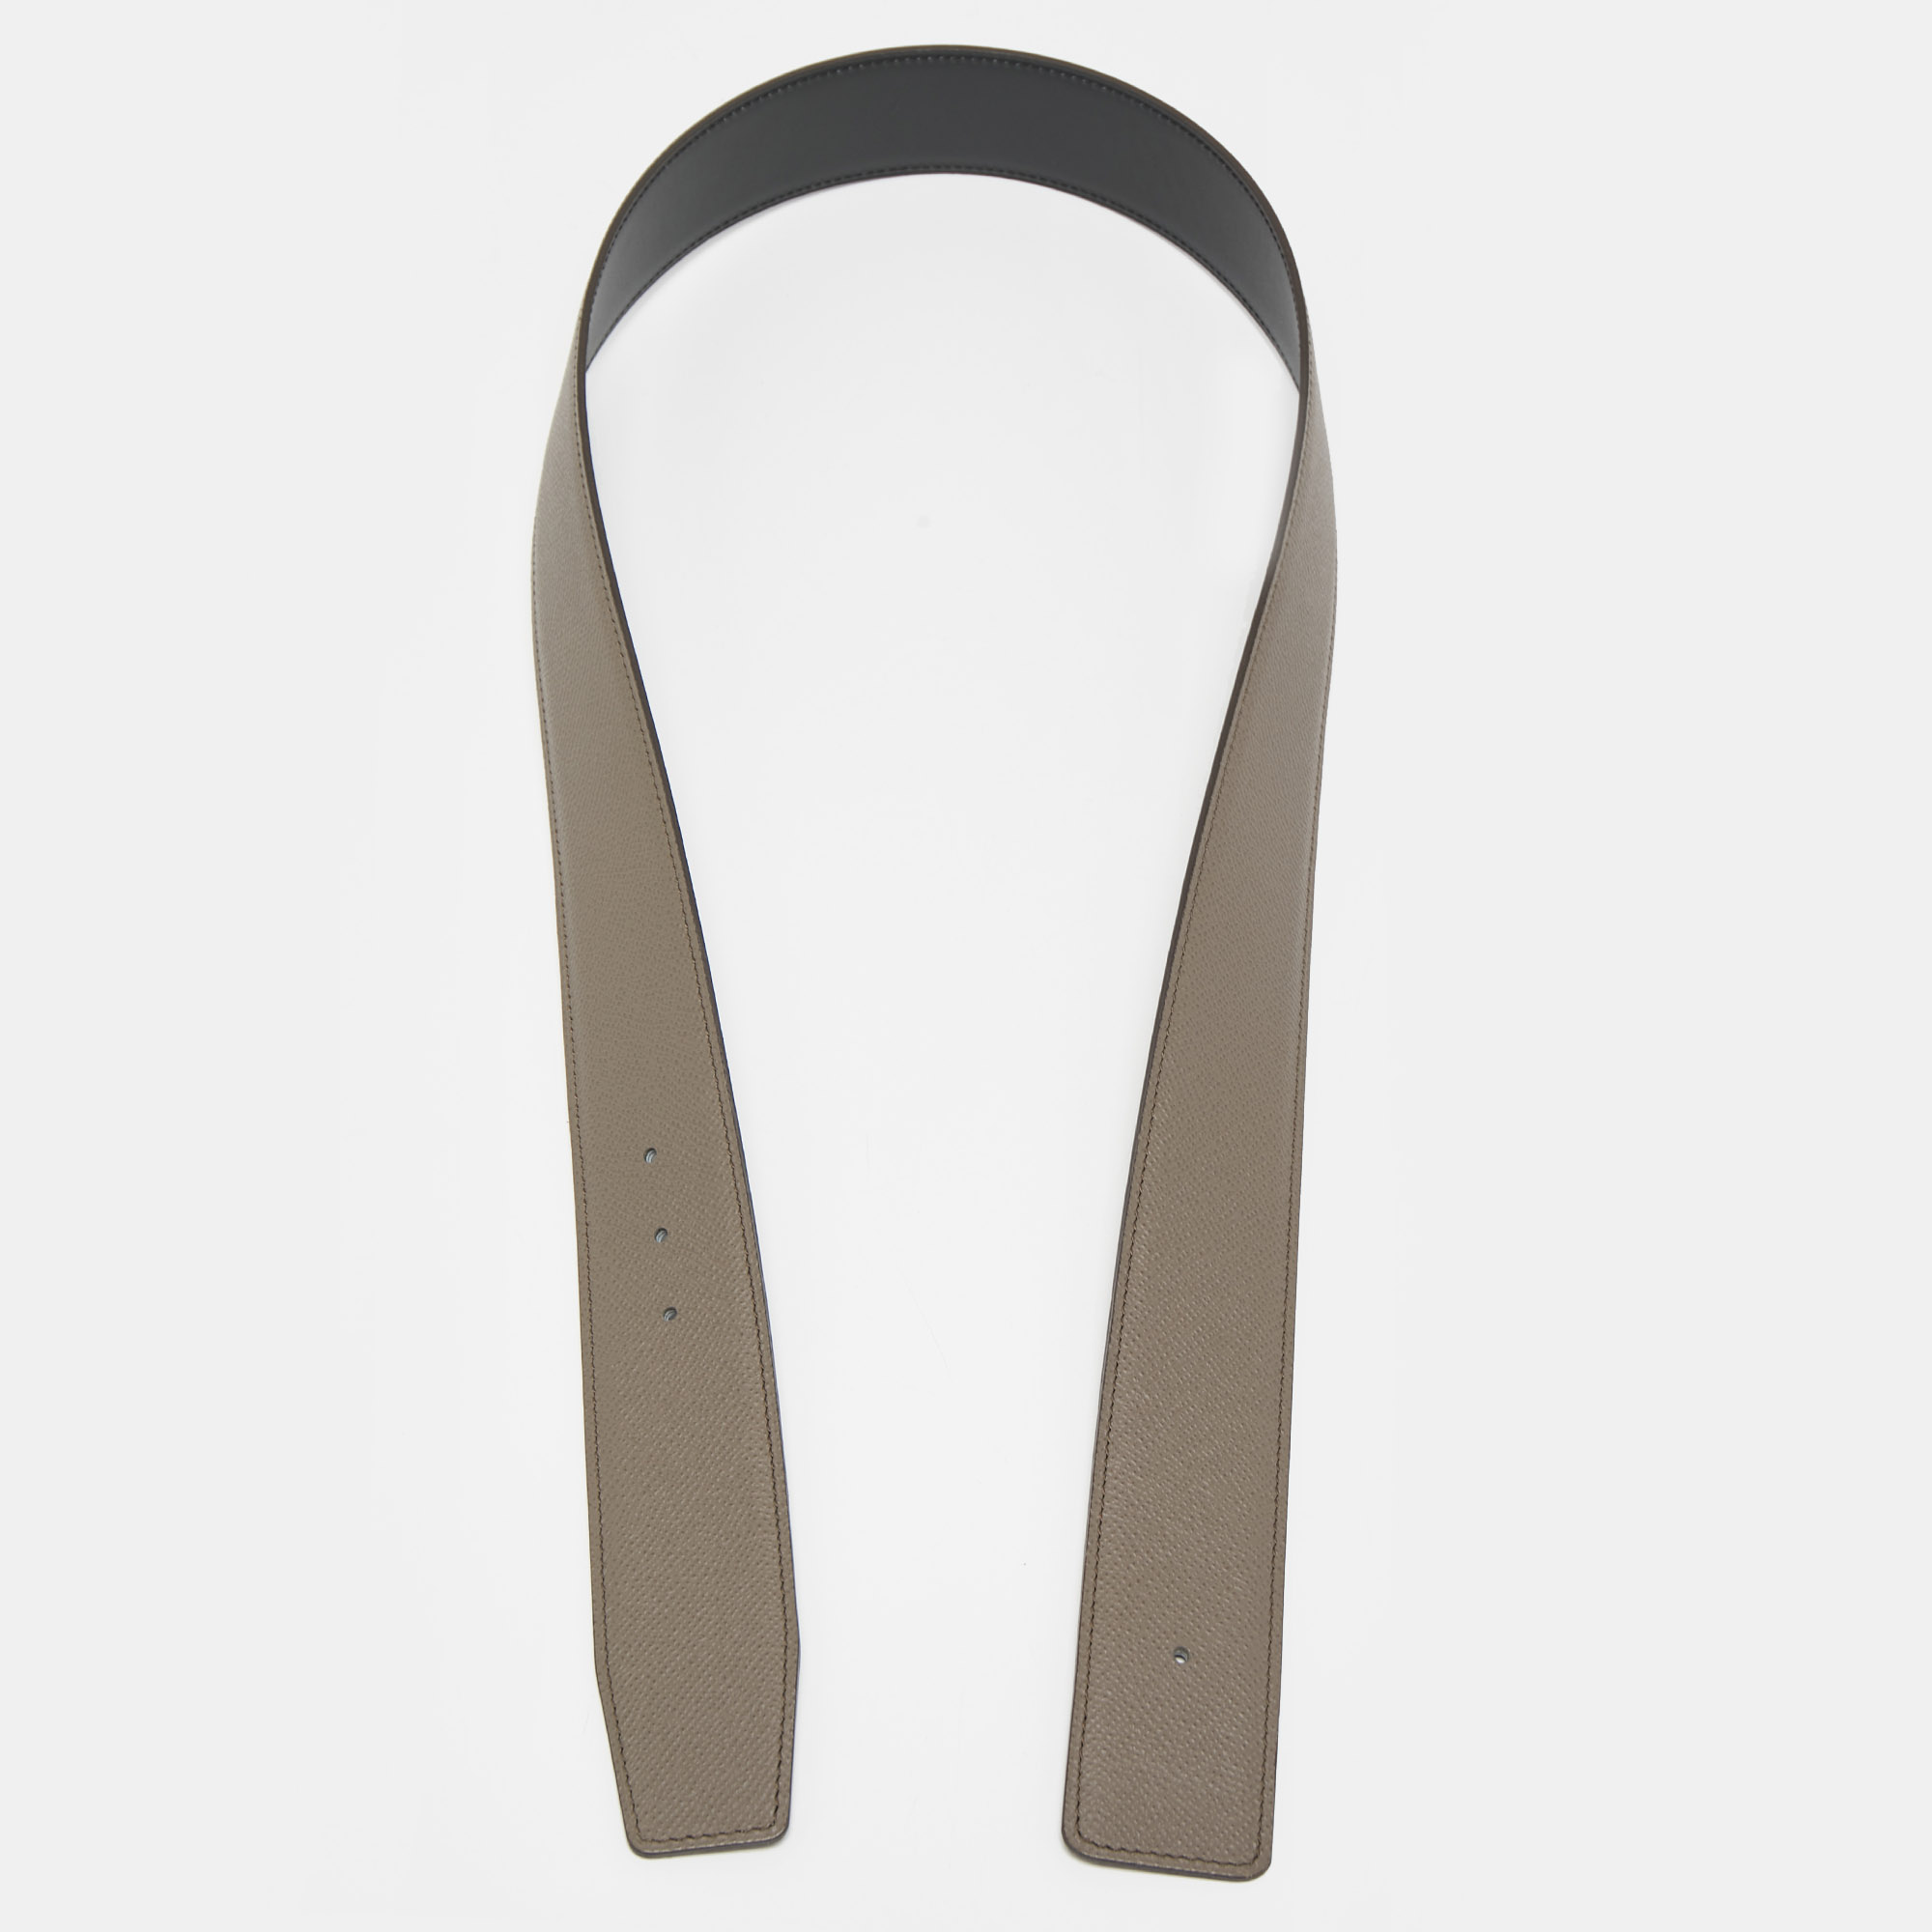 The classic and one of the iconic styles from the house of Hermes is their belts which give this luxurious piece a multi utility and versatile look. Crafted from leather this belt strap features tonal stitching around the edges along with adjustable holes and arrangements to add a buckle of your choice.